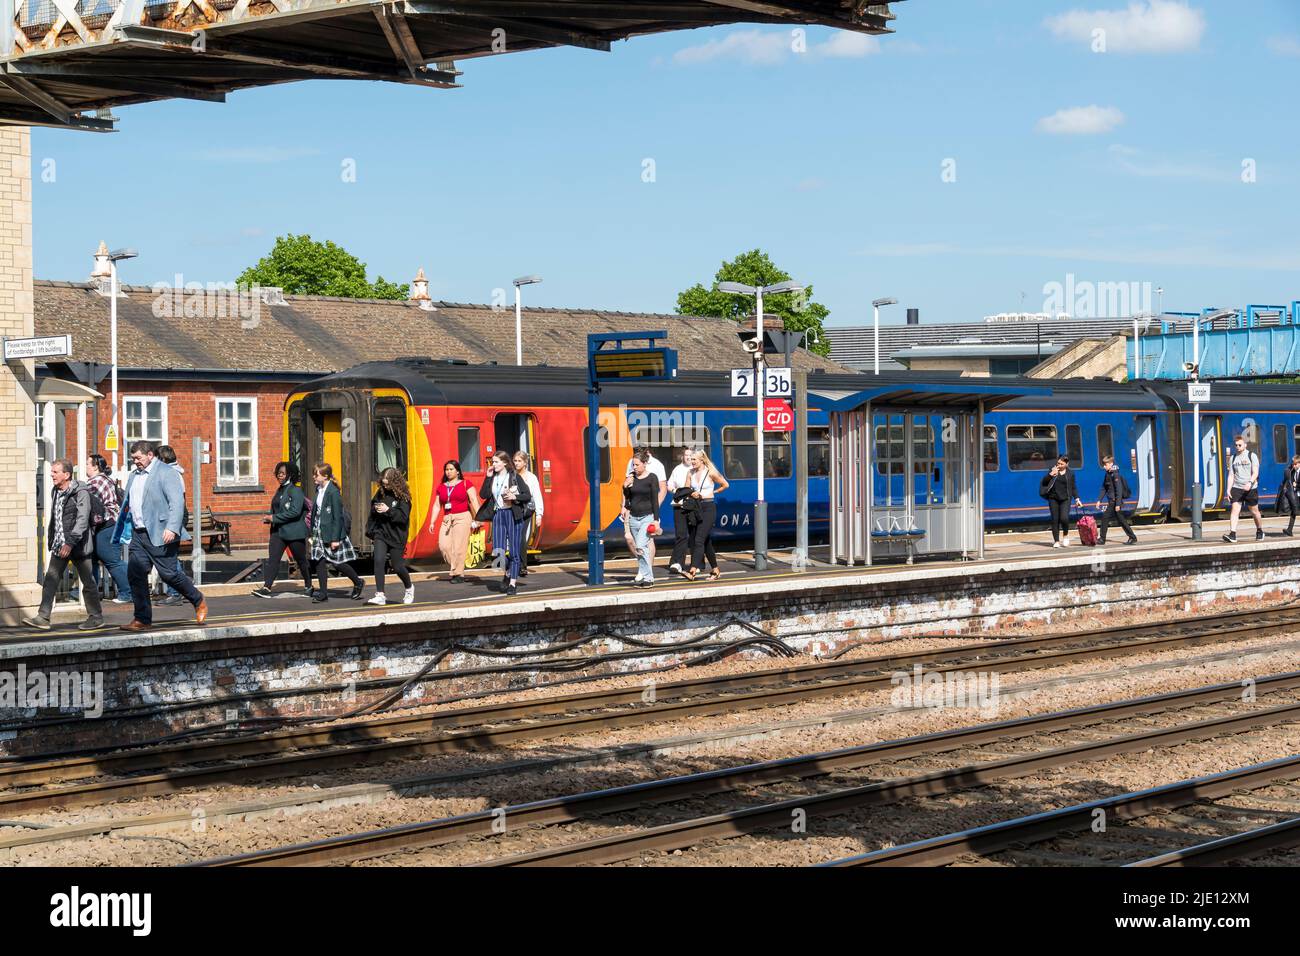 People disembarking from newly arrived train at platform 2 Lincoln railway station 2022 Stock Photo